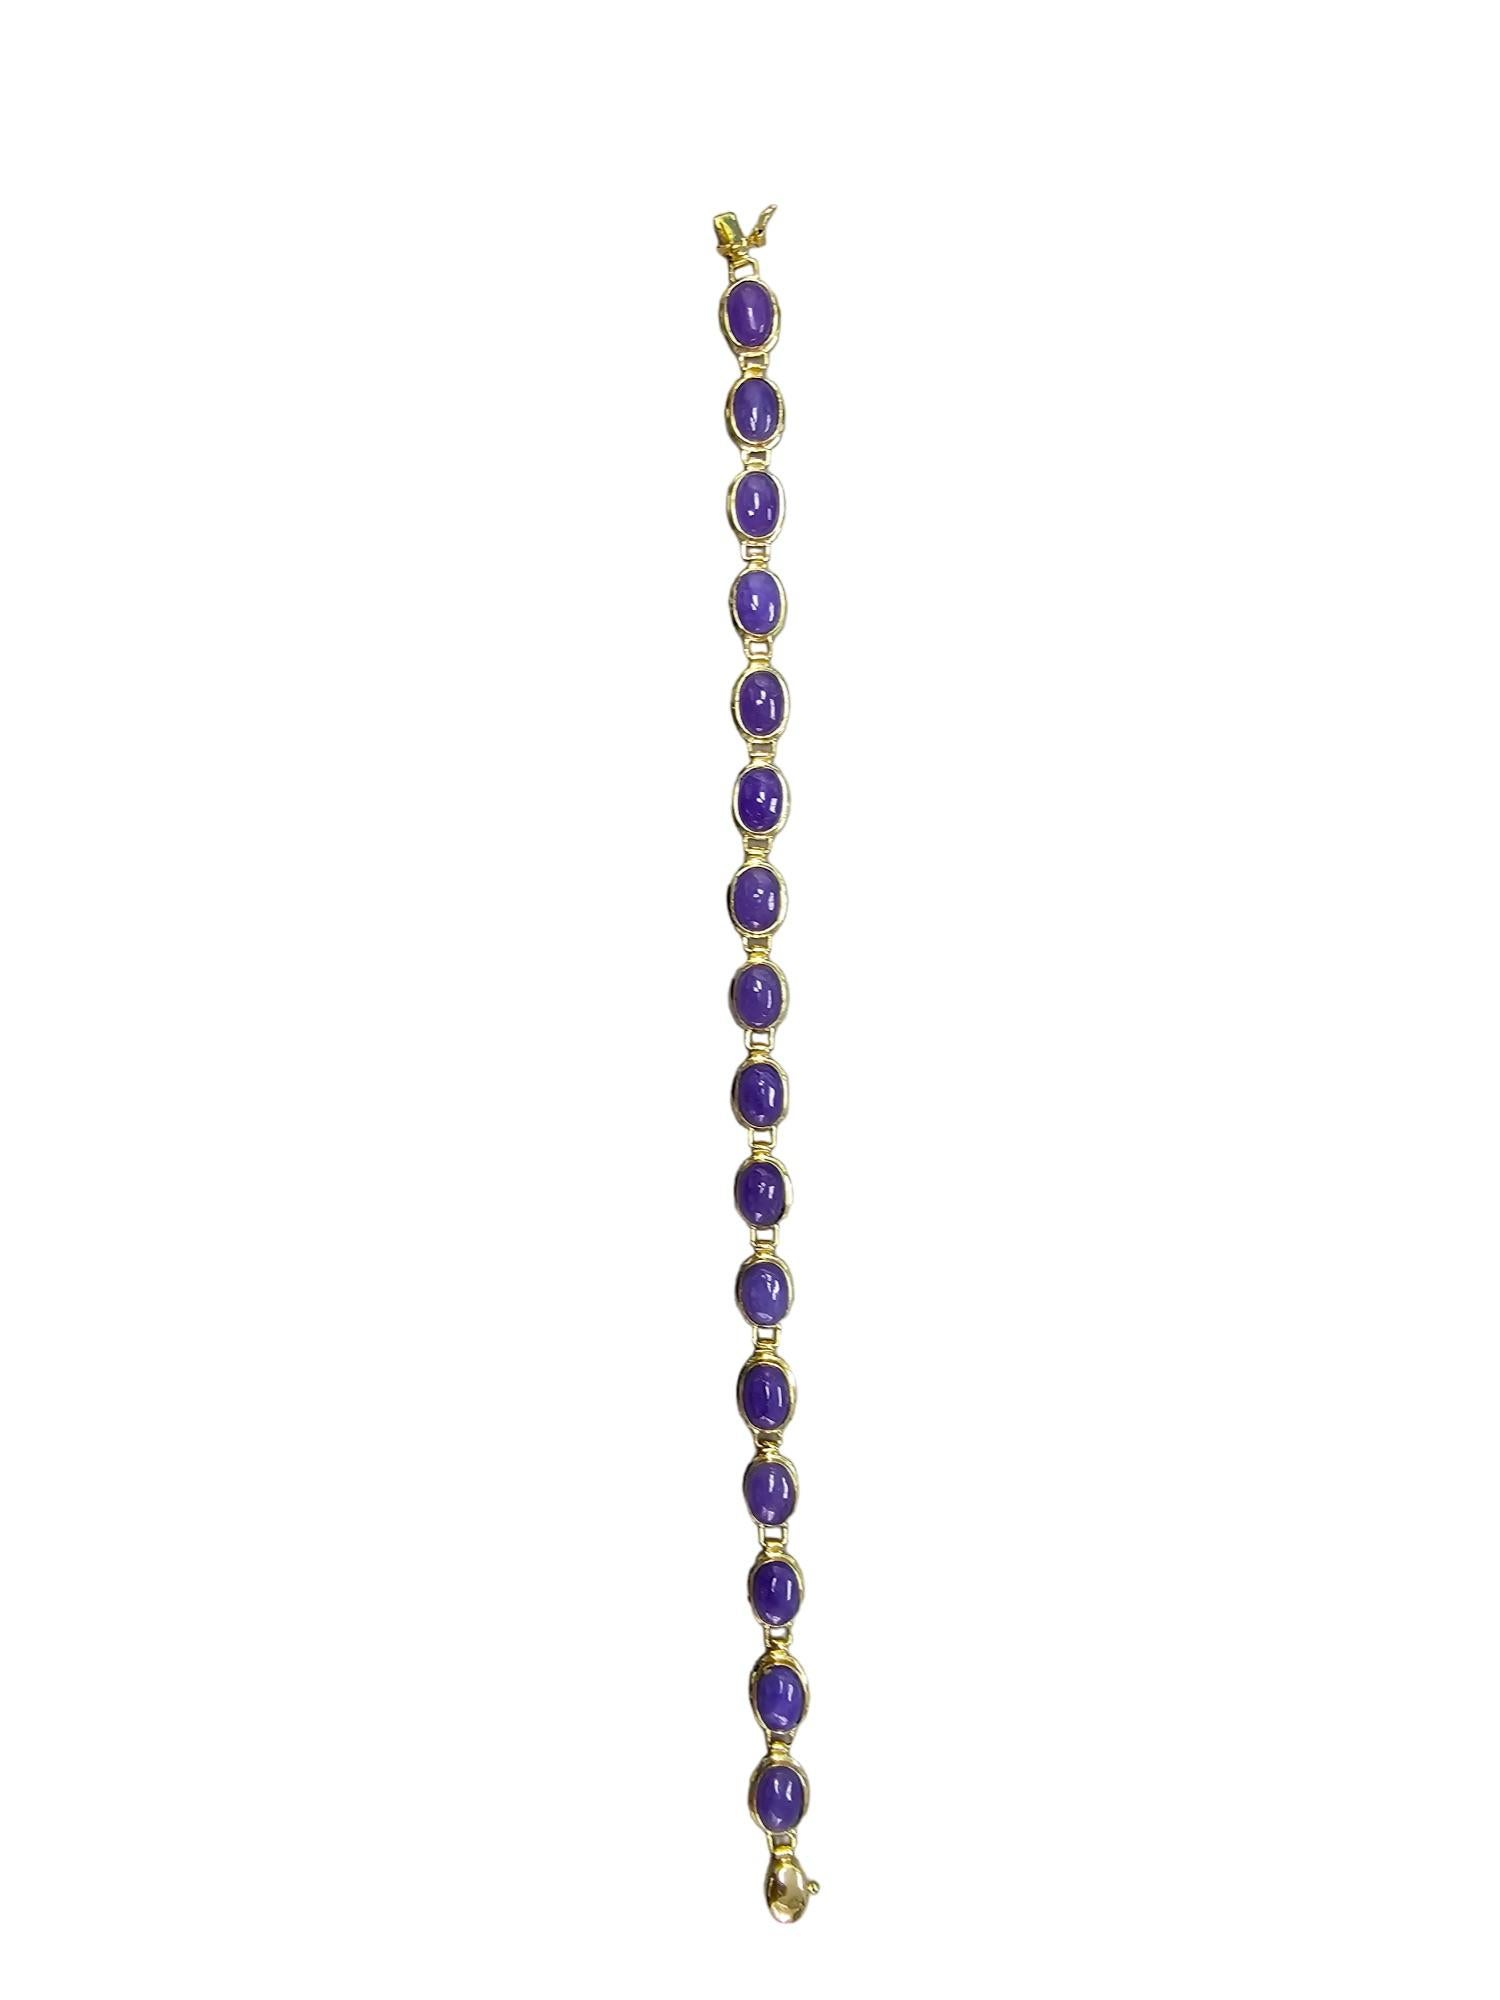 Tibetan Purple Lavender Jadeite Beaded Bracelet (with 14K Solid Yellow Gold) In New Condition For Sale In Kowloon, HK